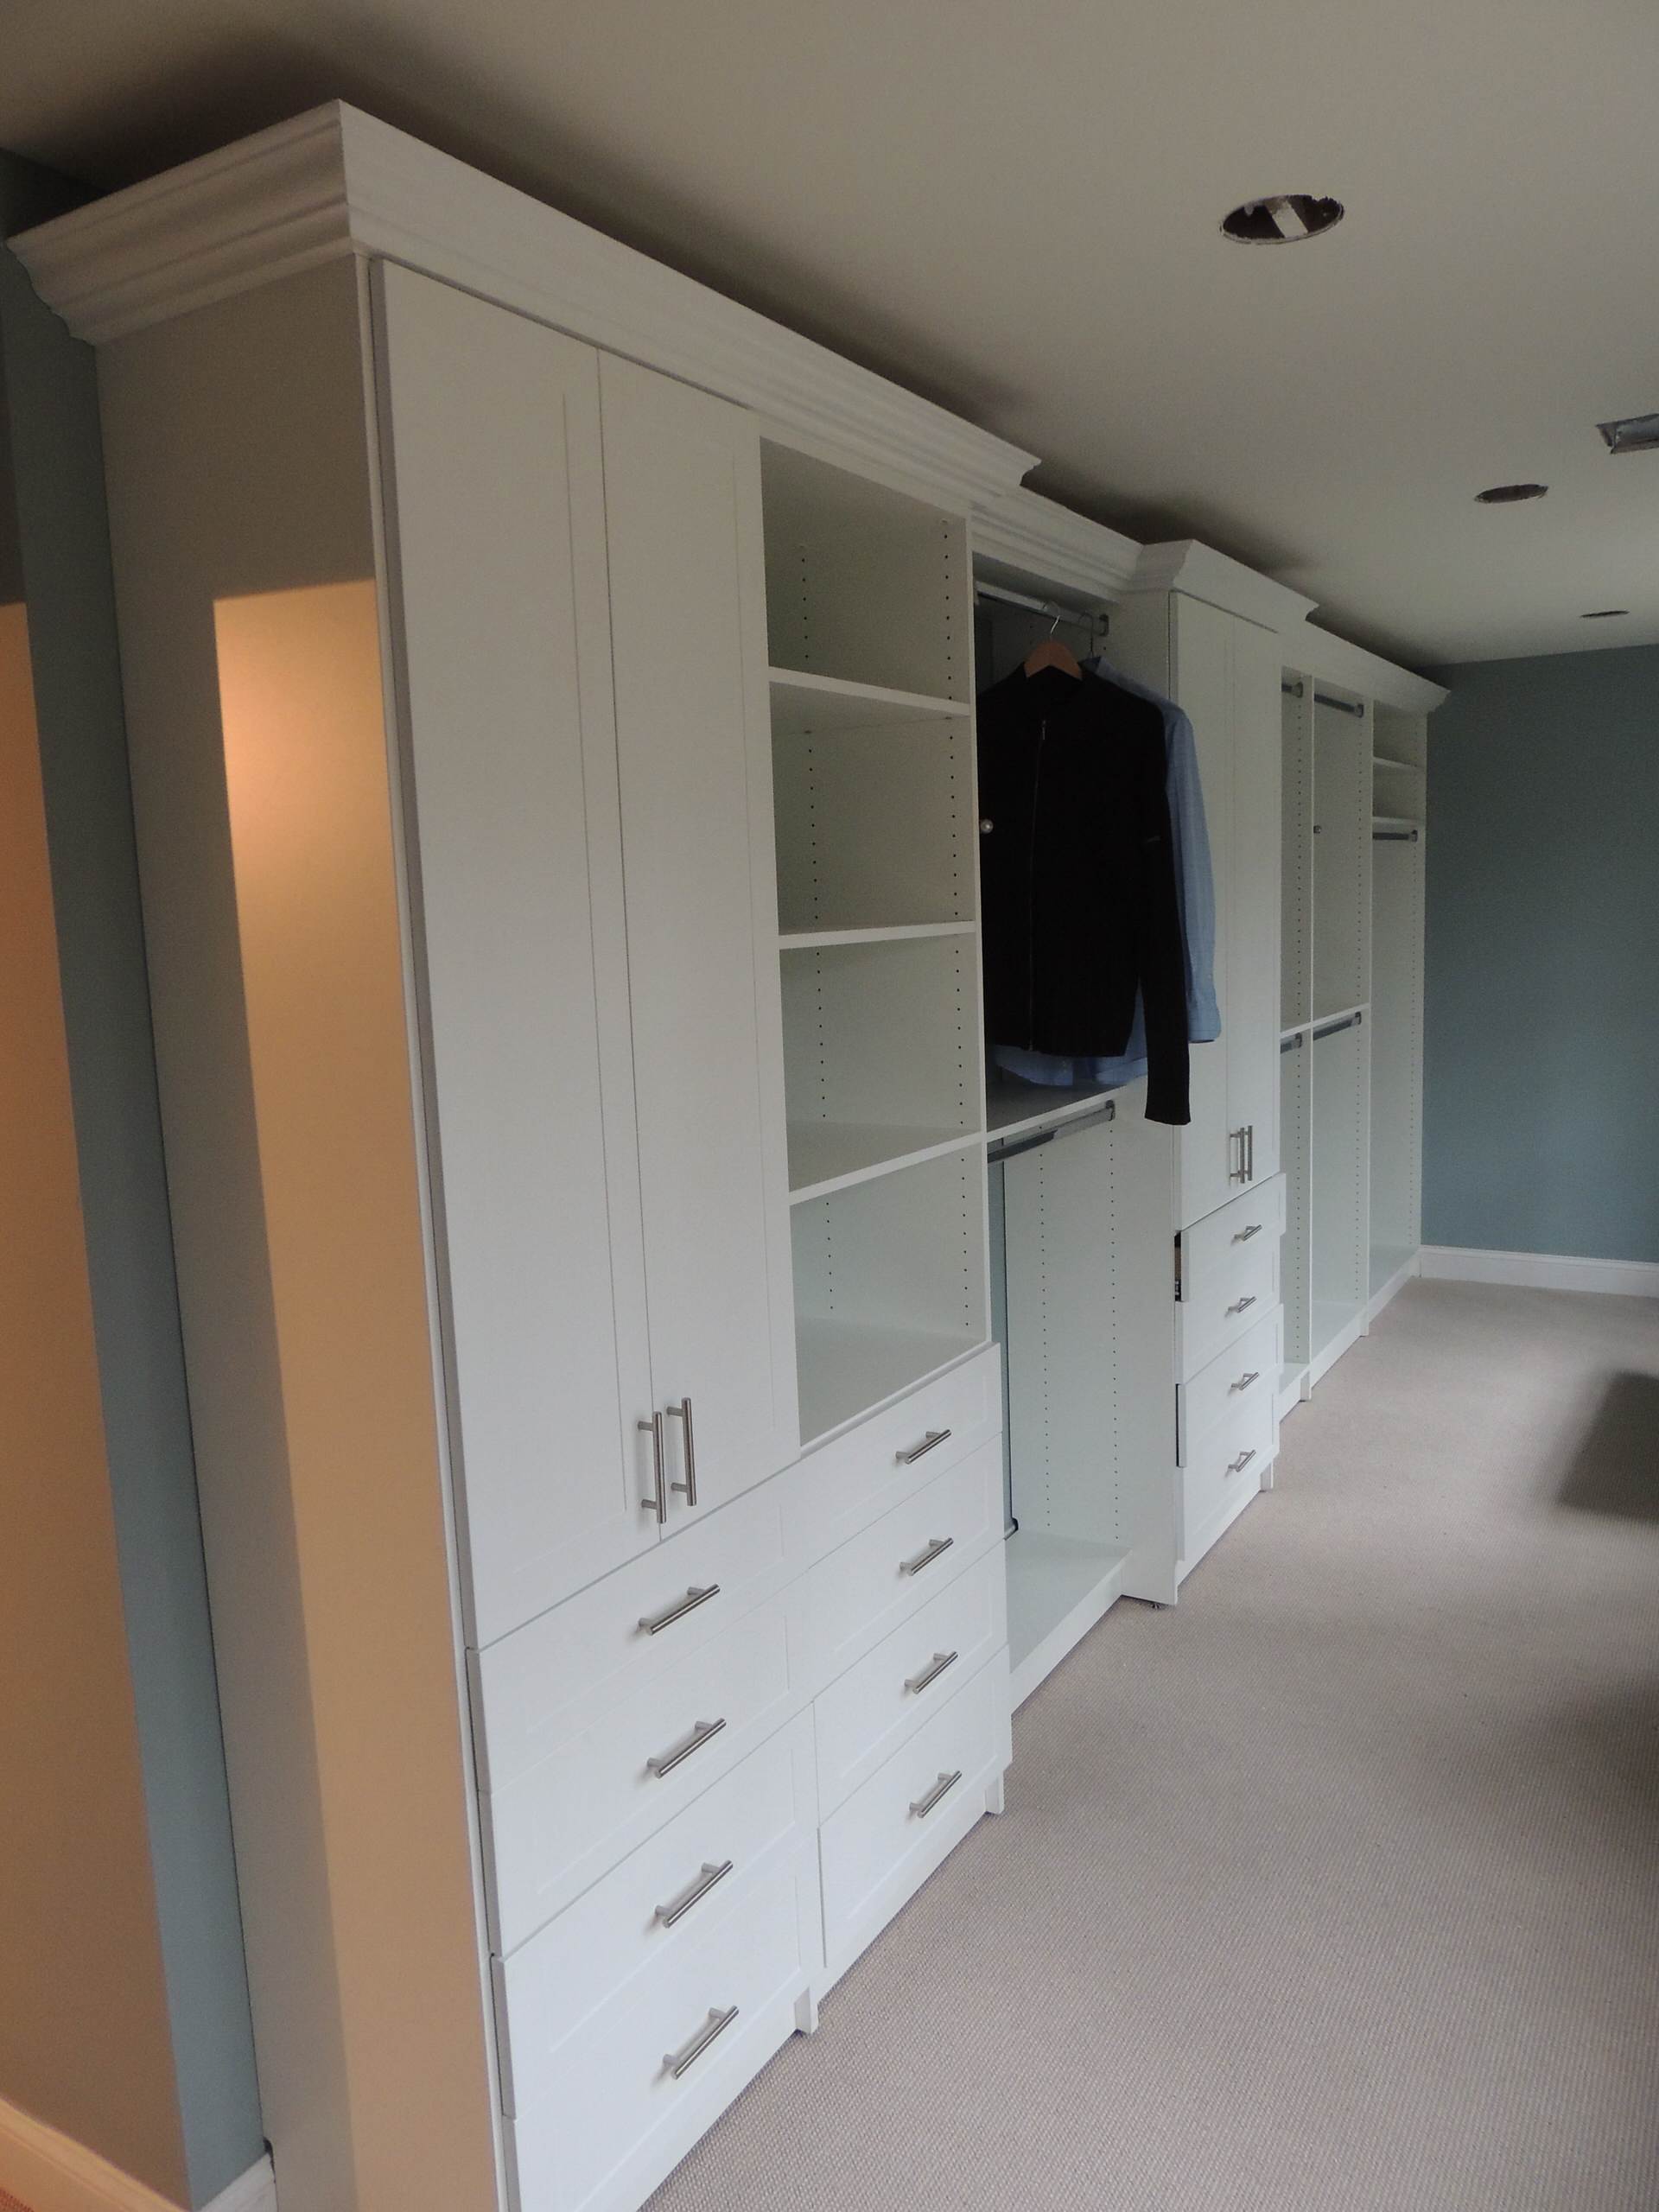 White cabinets with double doors and drawers, hang units, topped with crown molding